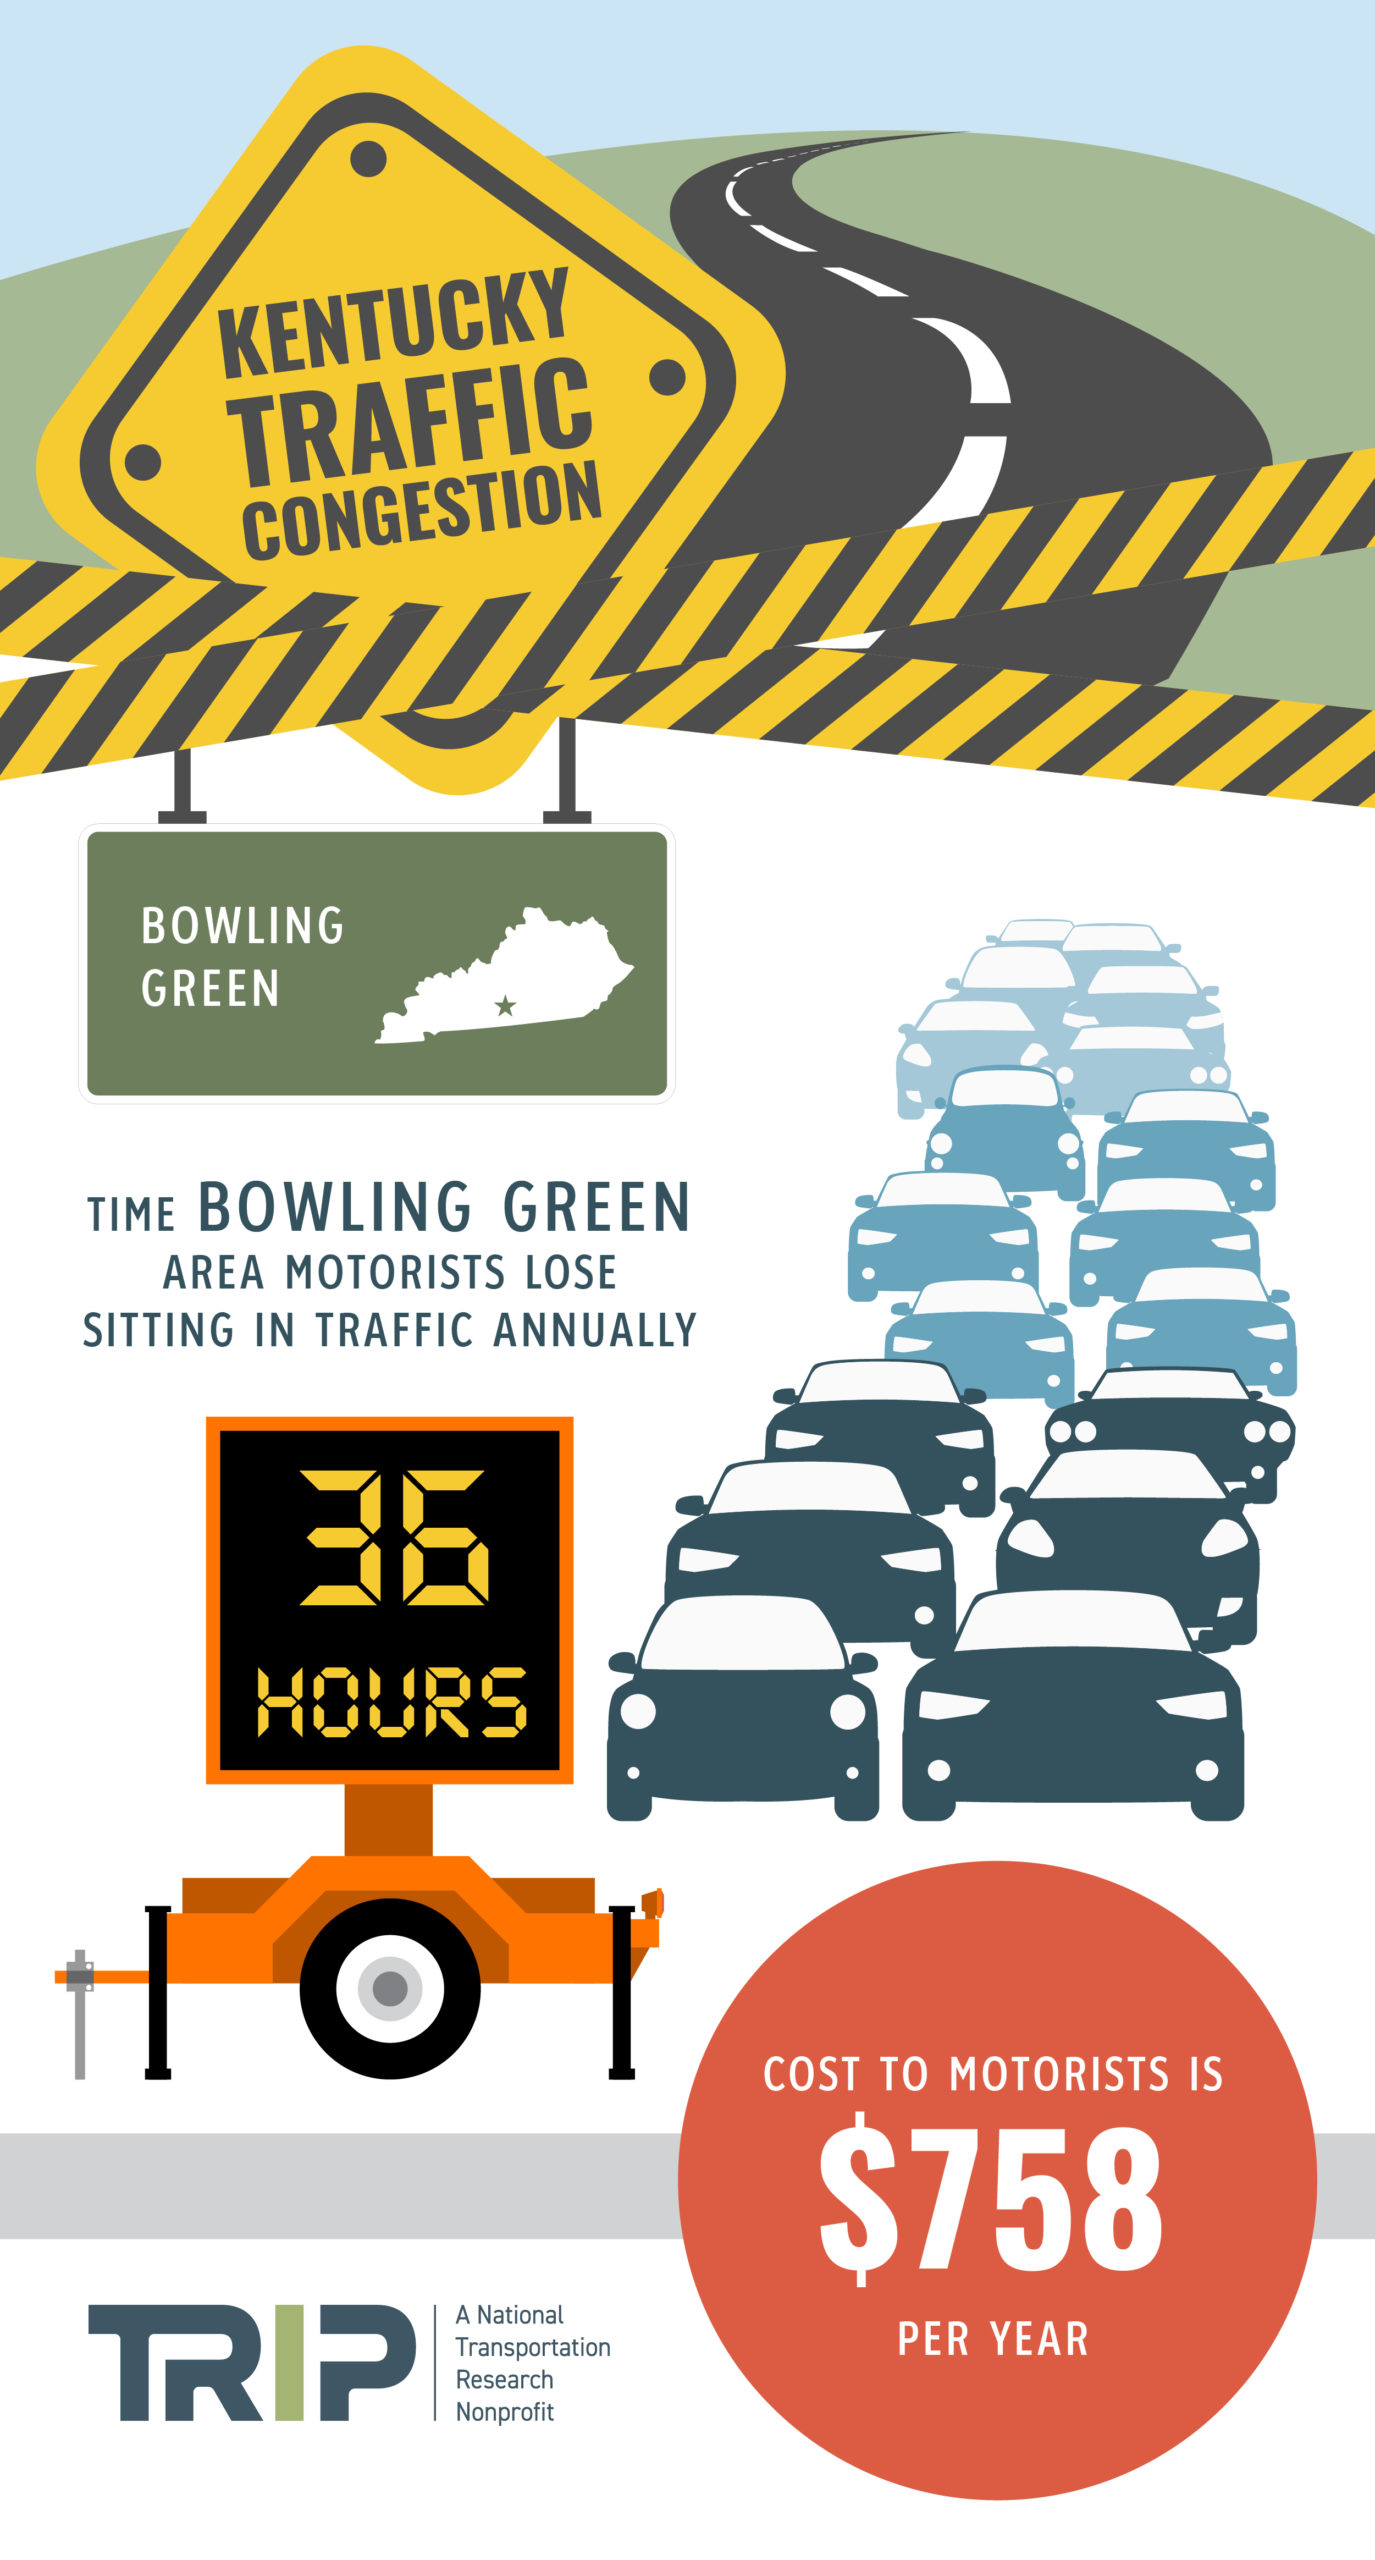 Bowling Green Traffic Congestion Infographic – March 2020